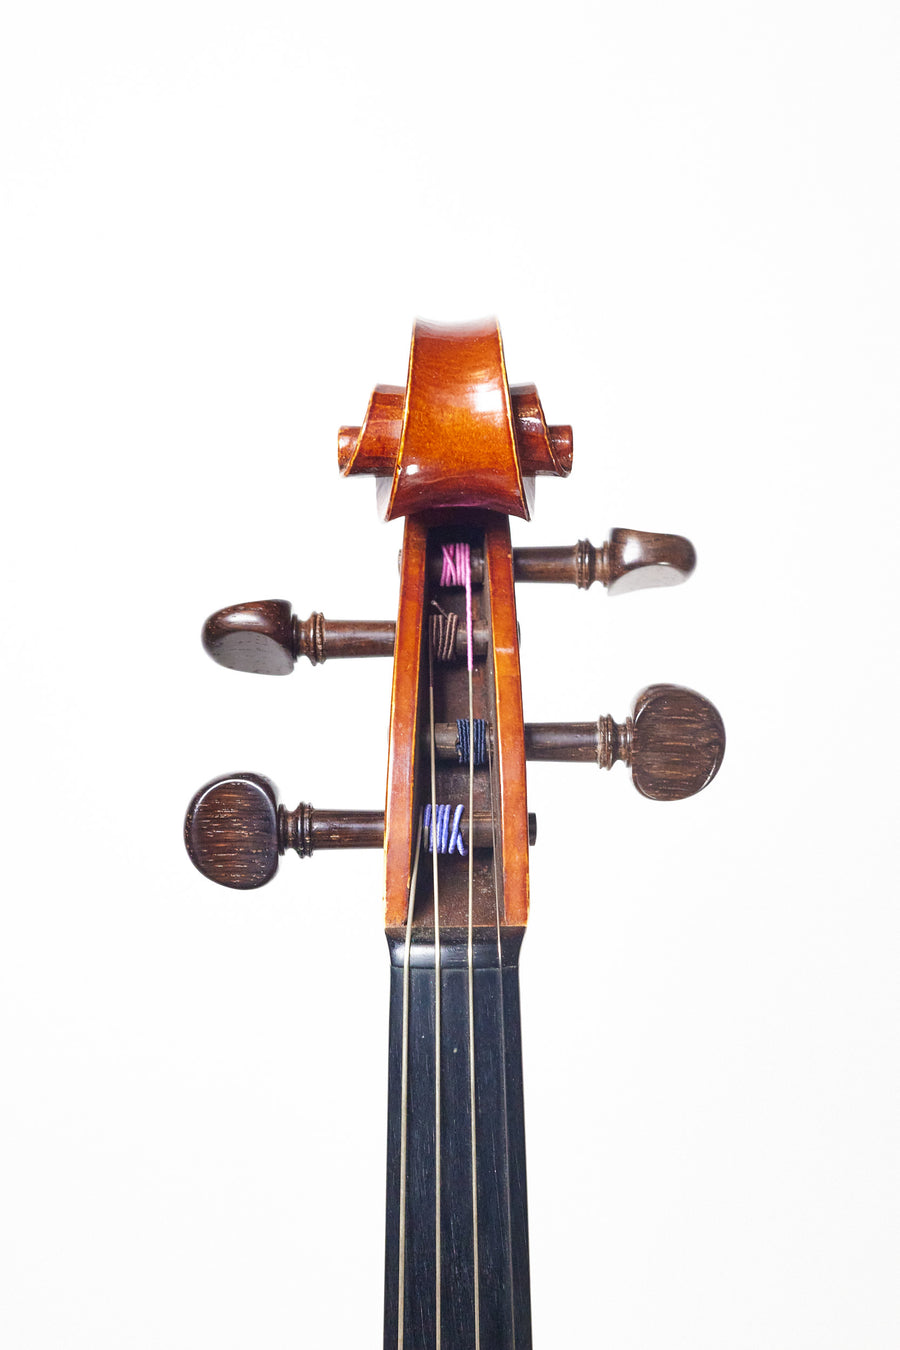 A Fine Contemporary Viola By Guy Rabut, 1998. 16 1/4”